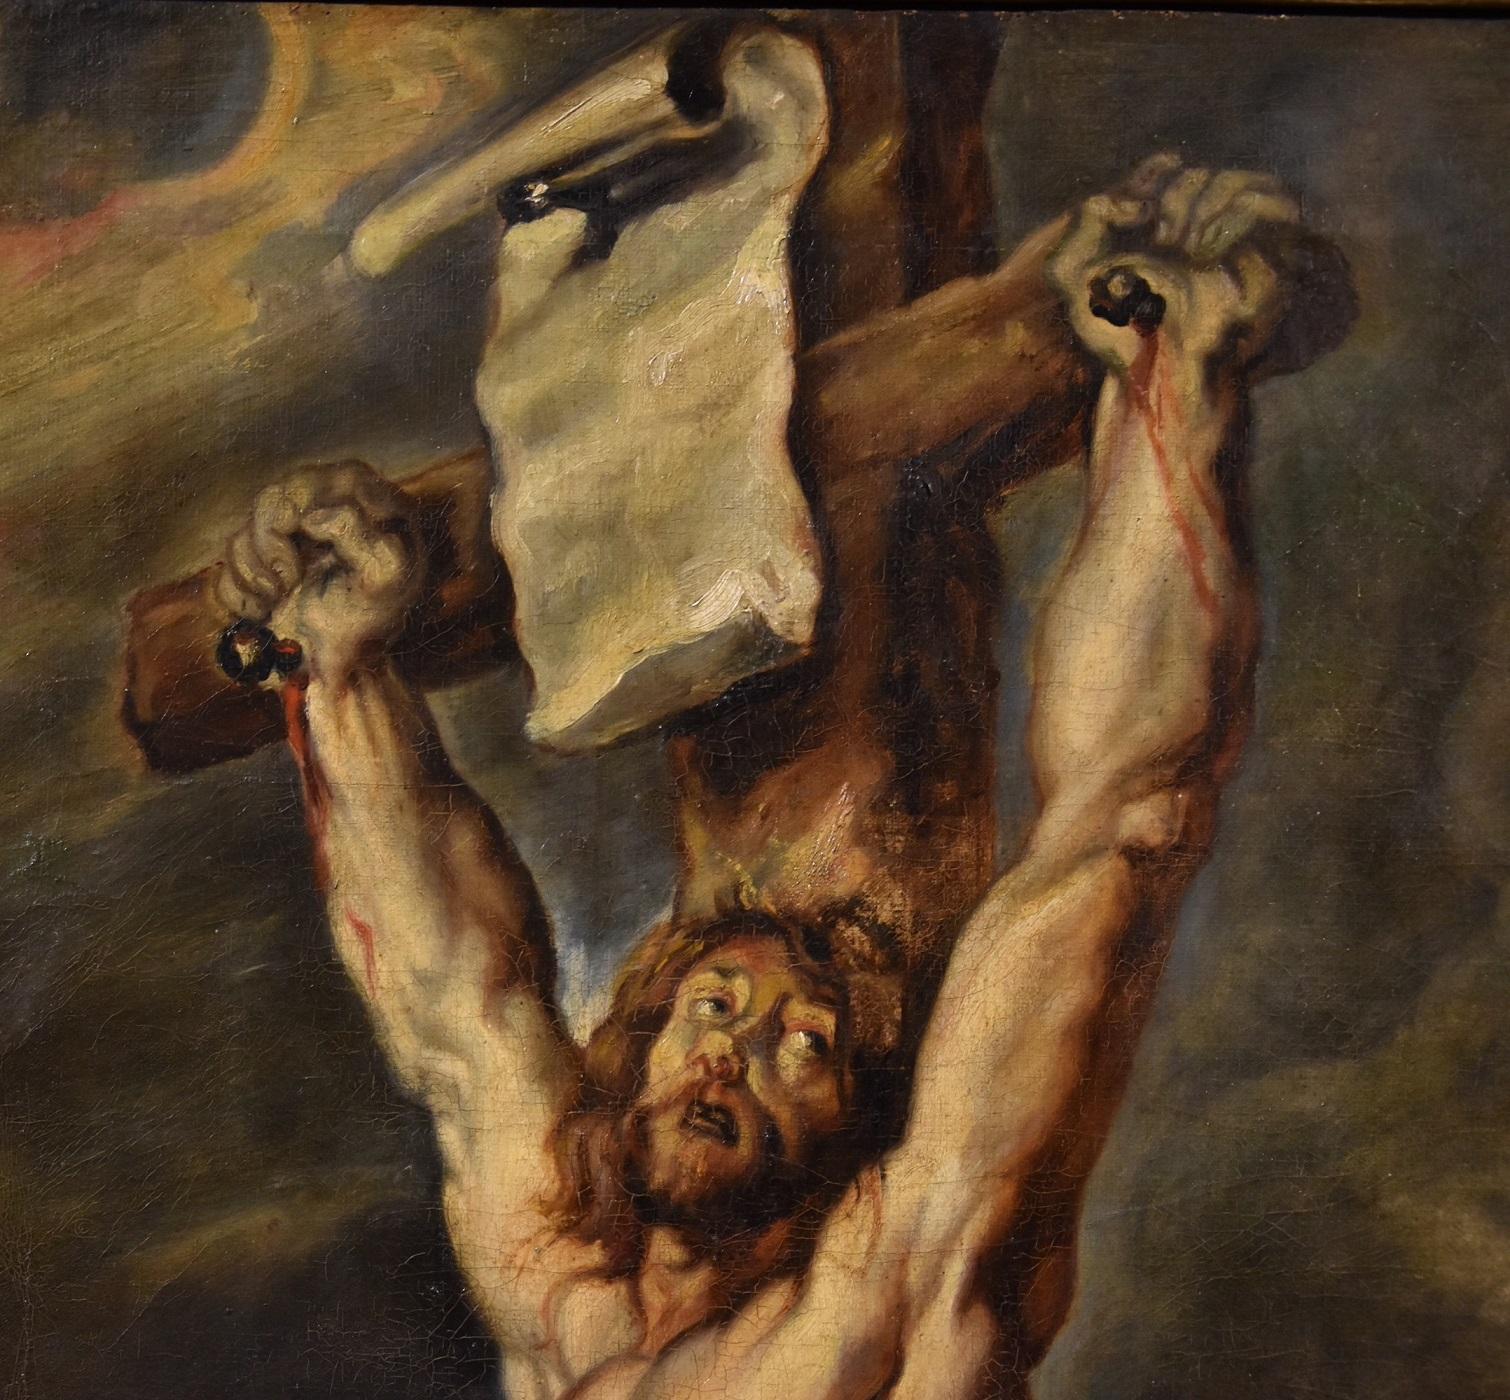 Christ Crucified Rubens Paint Oil on canvas Old master 17th Century Religious 1